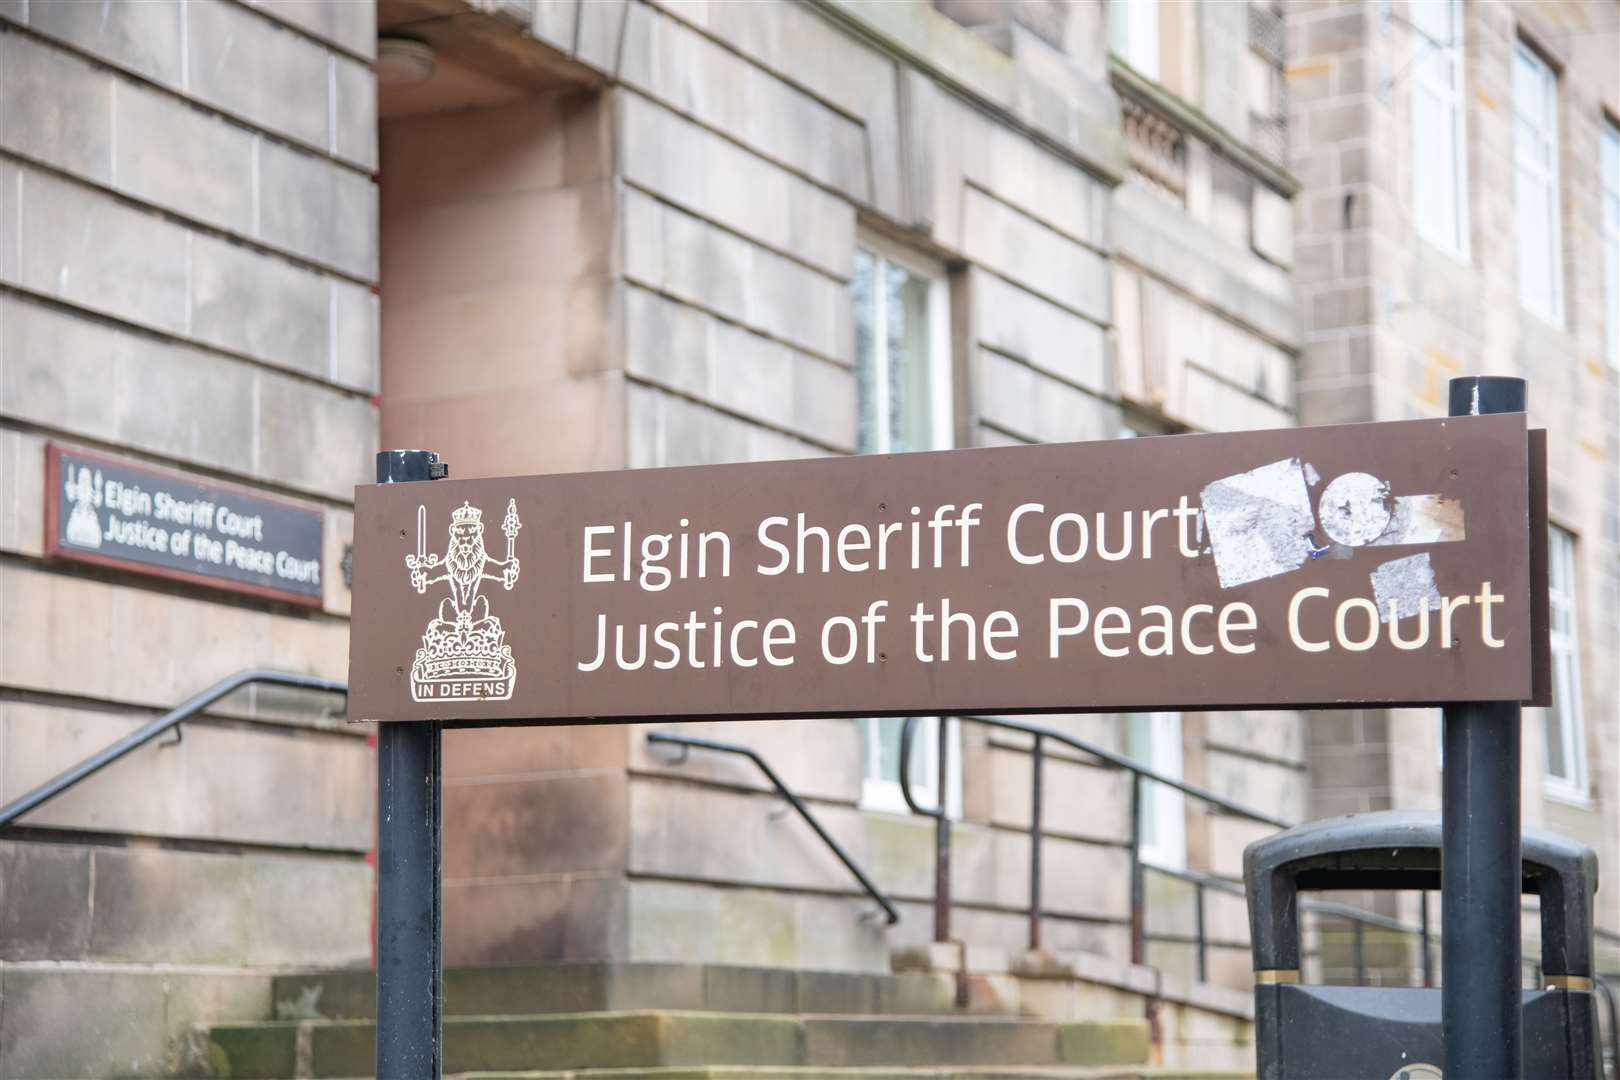 Portgordon resident Ricki Thain was ordered to pay the taxi driver £250 in compensation at Elgin Sheriff Court. Picture: Daniel Forsyth